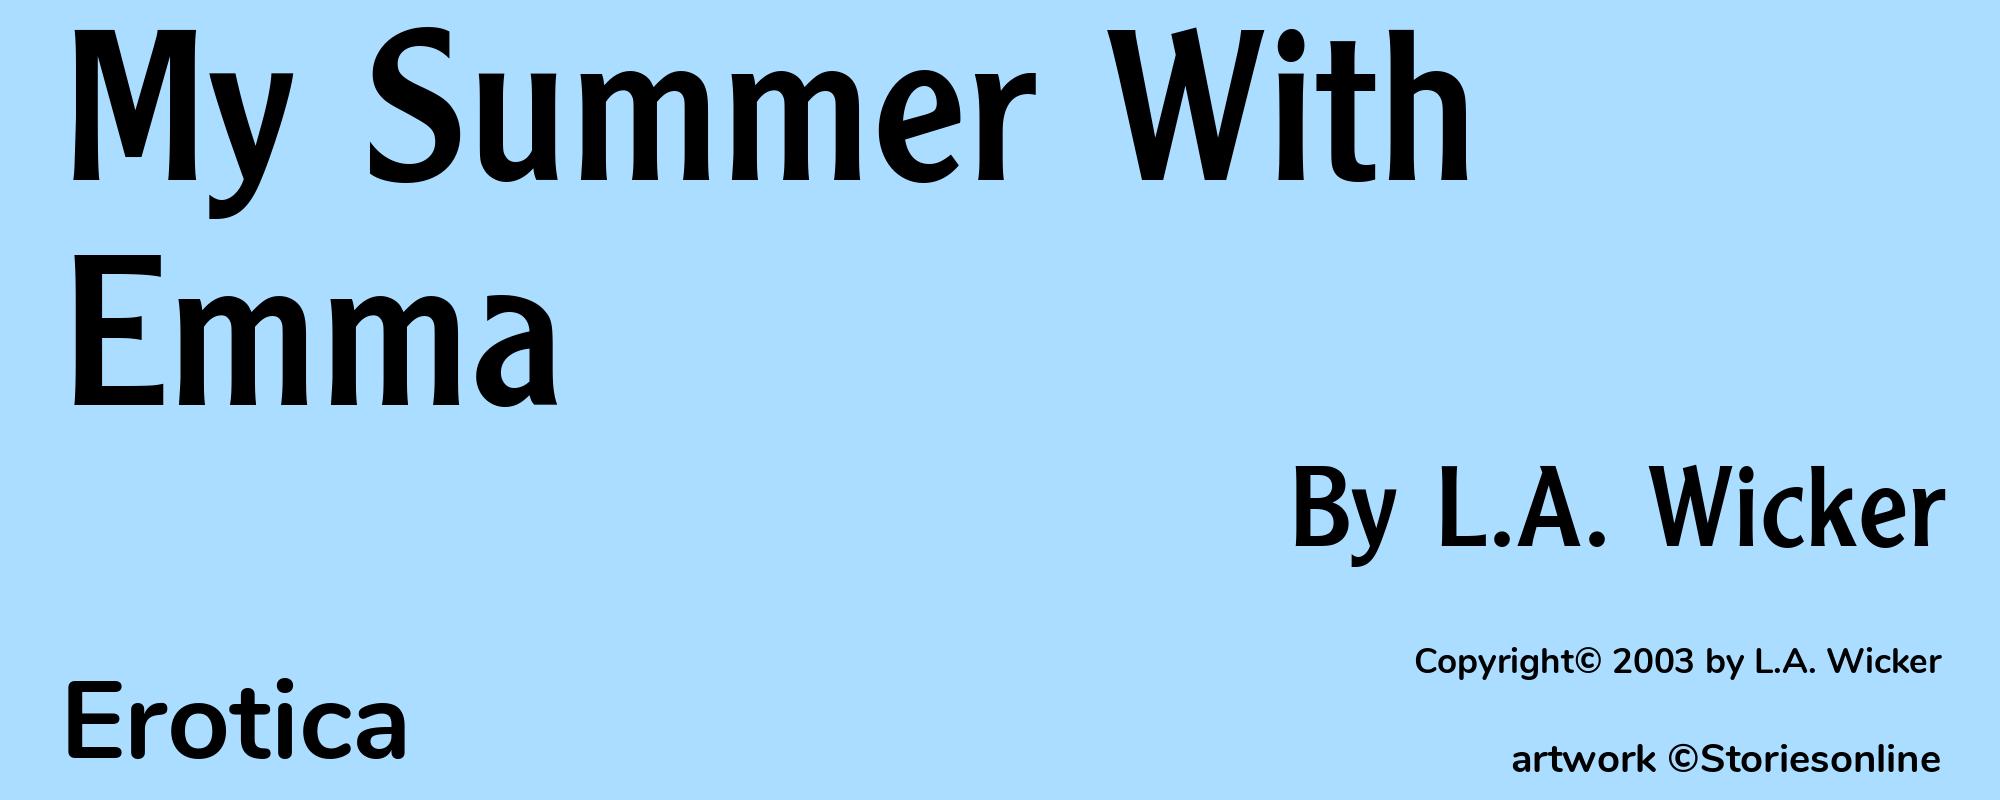 My Summer With Emma - Cover